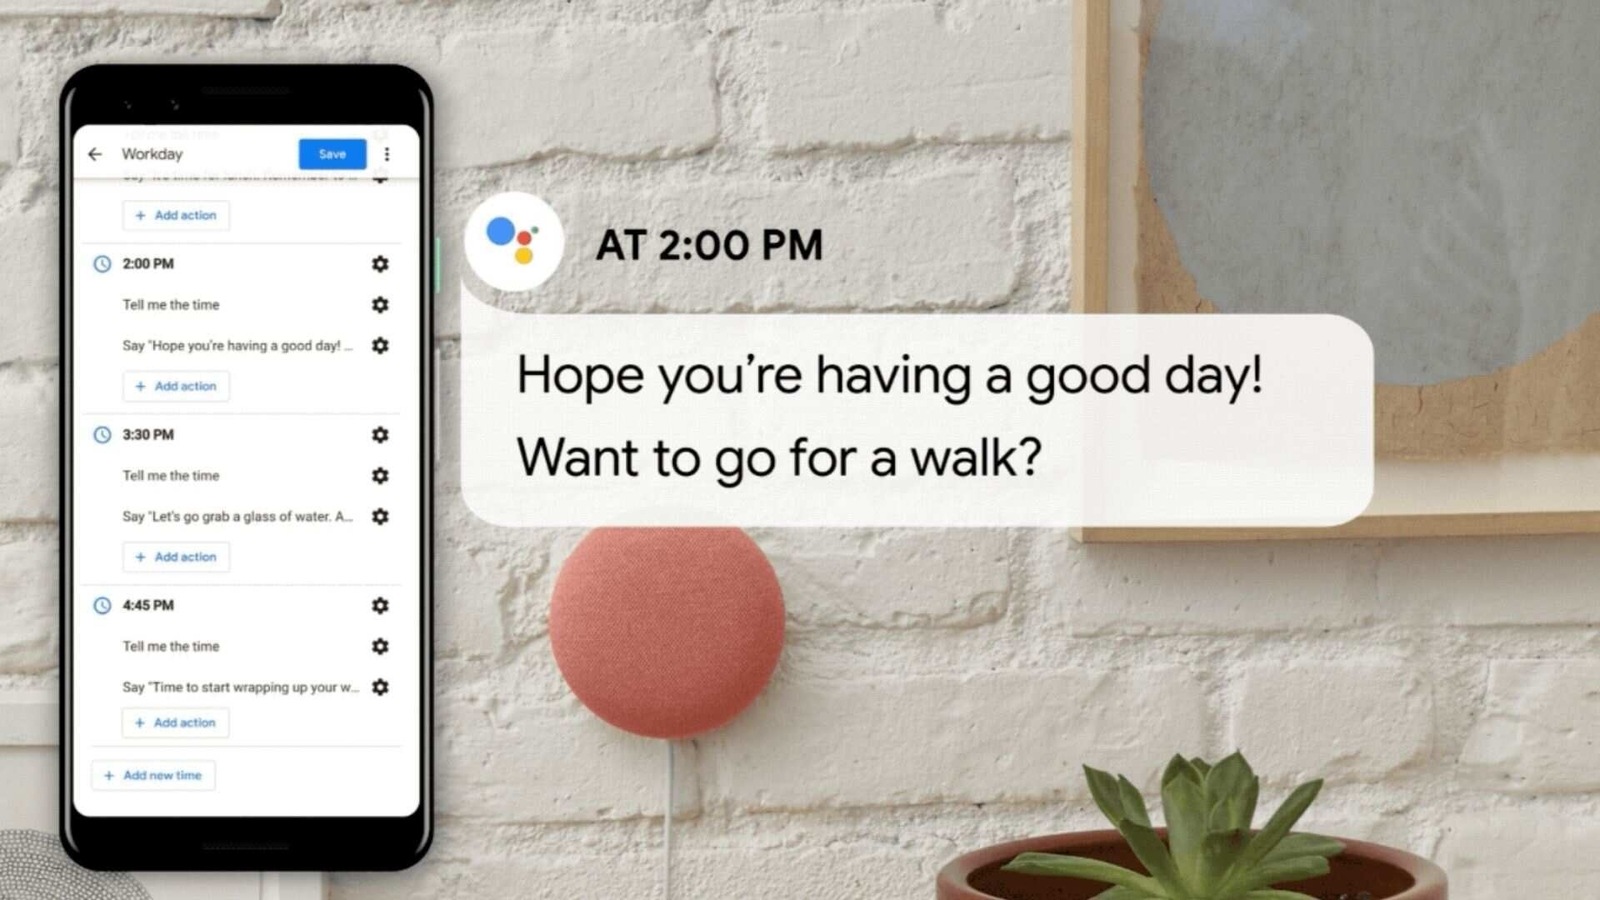 How to Use Google Assistant on iPhone